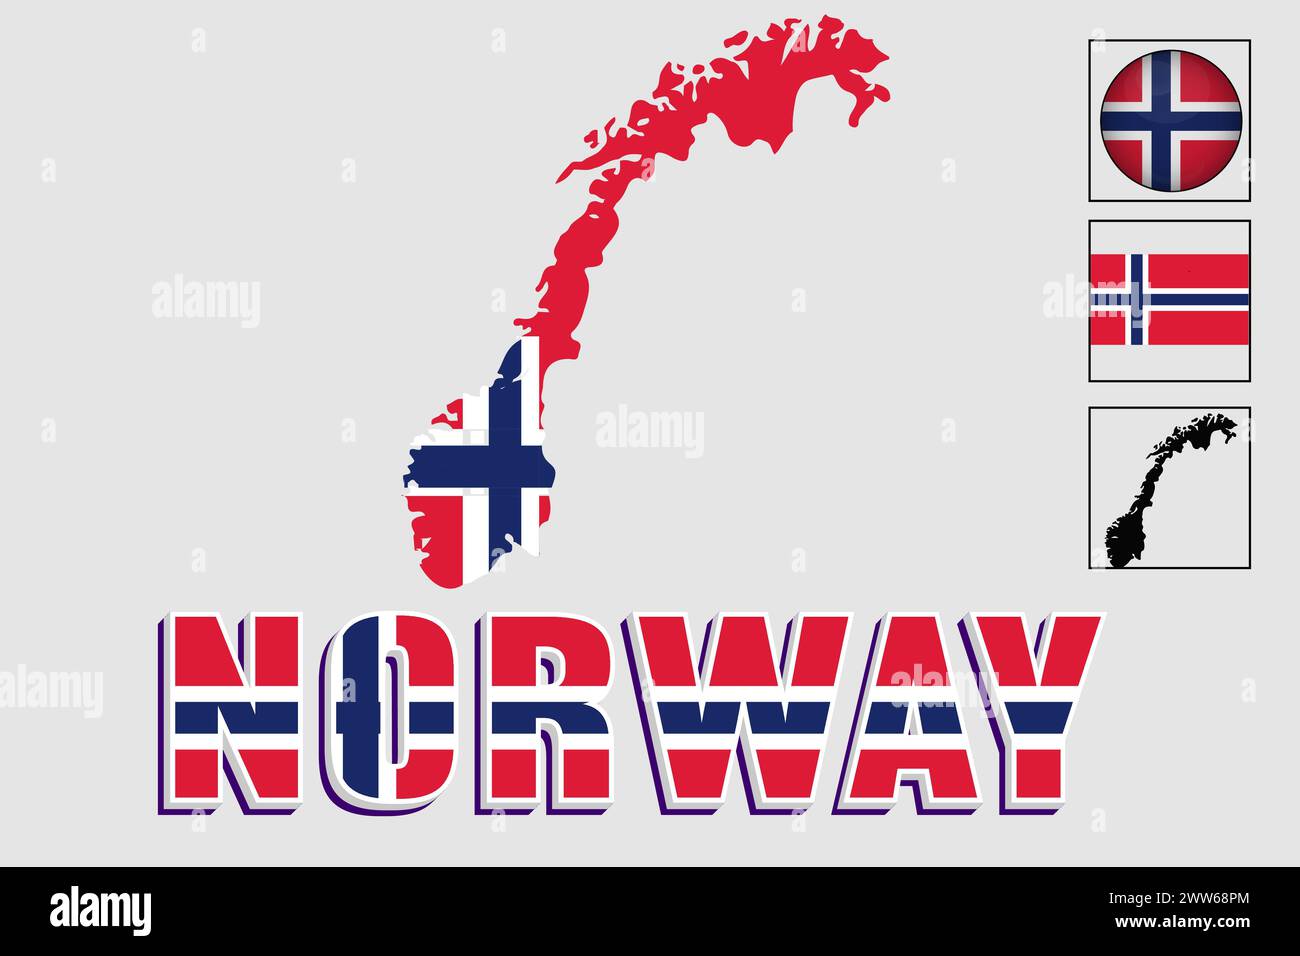 Norway flag and map in a vector graphic Stock Vector